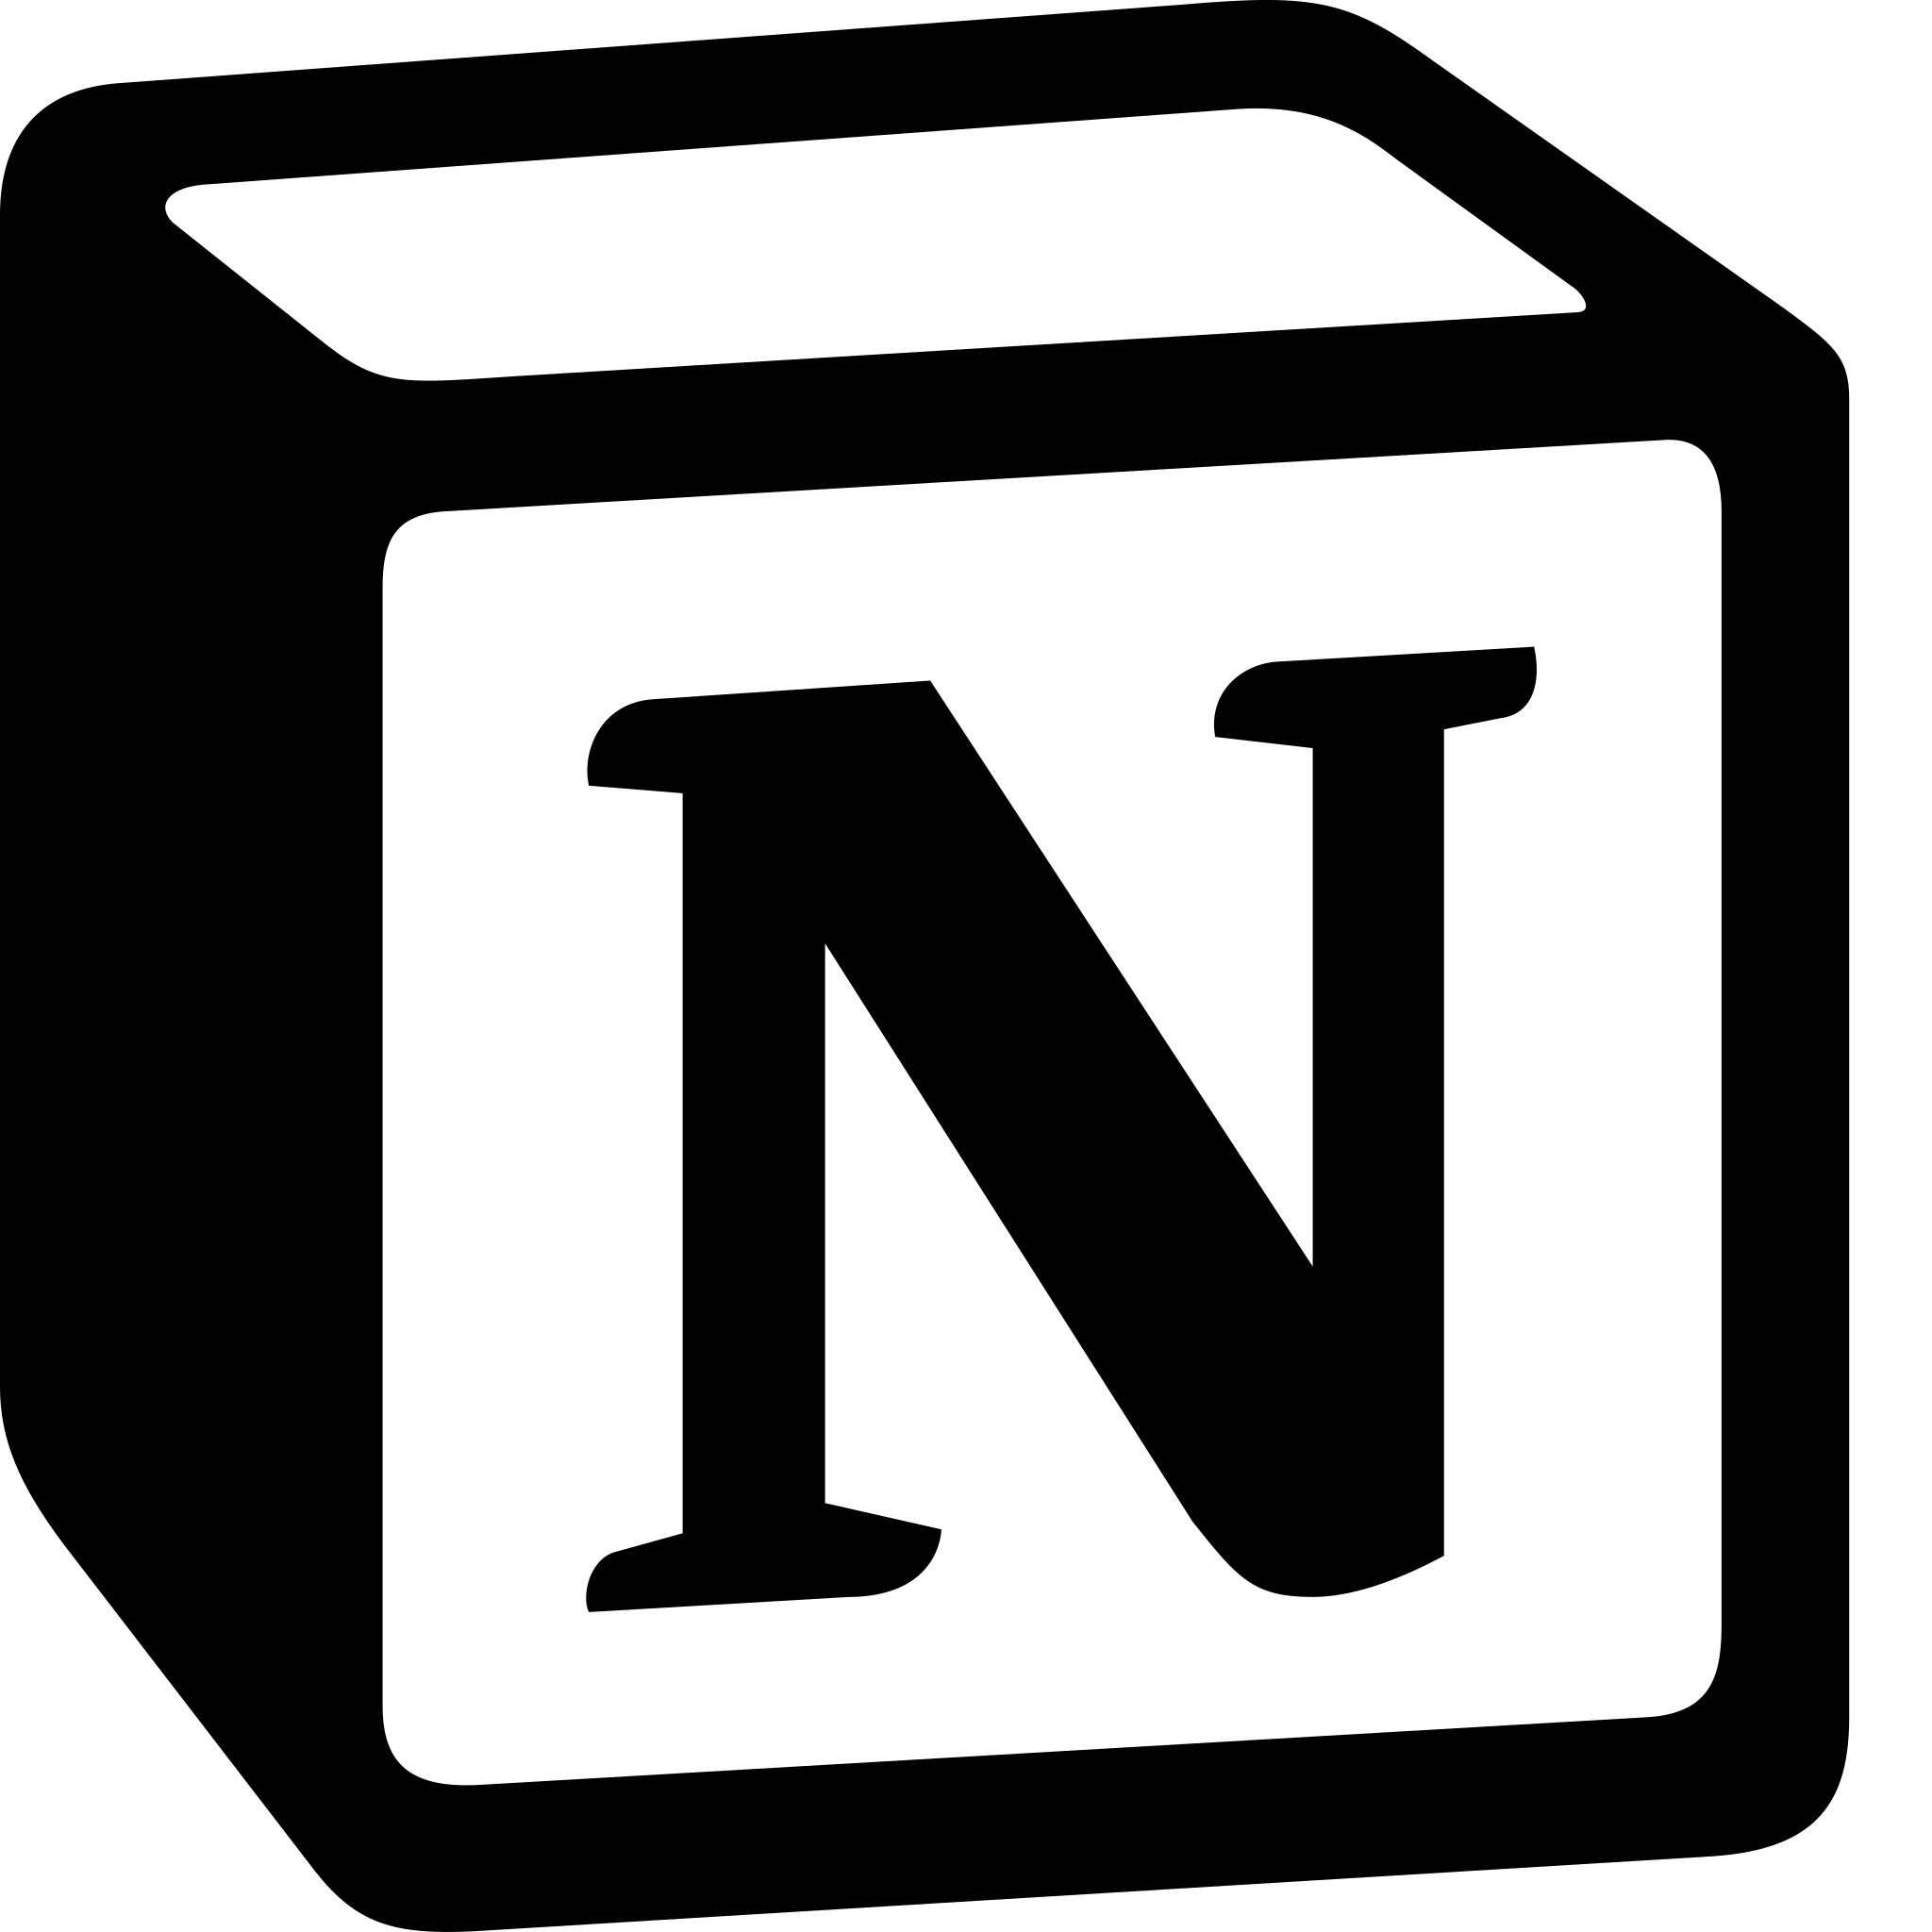 How to create a Form in Notion?